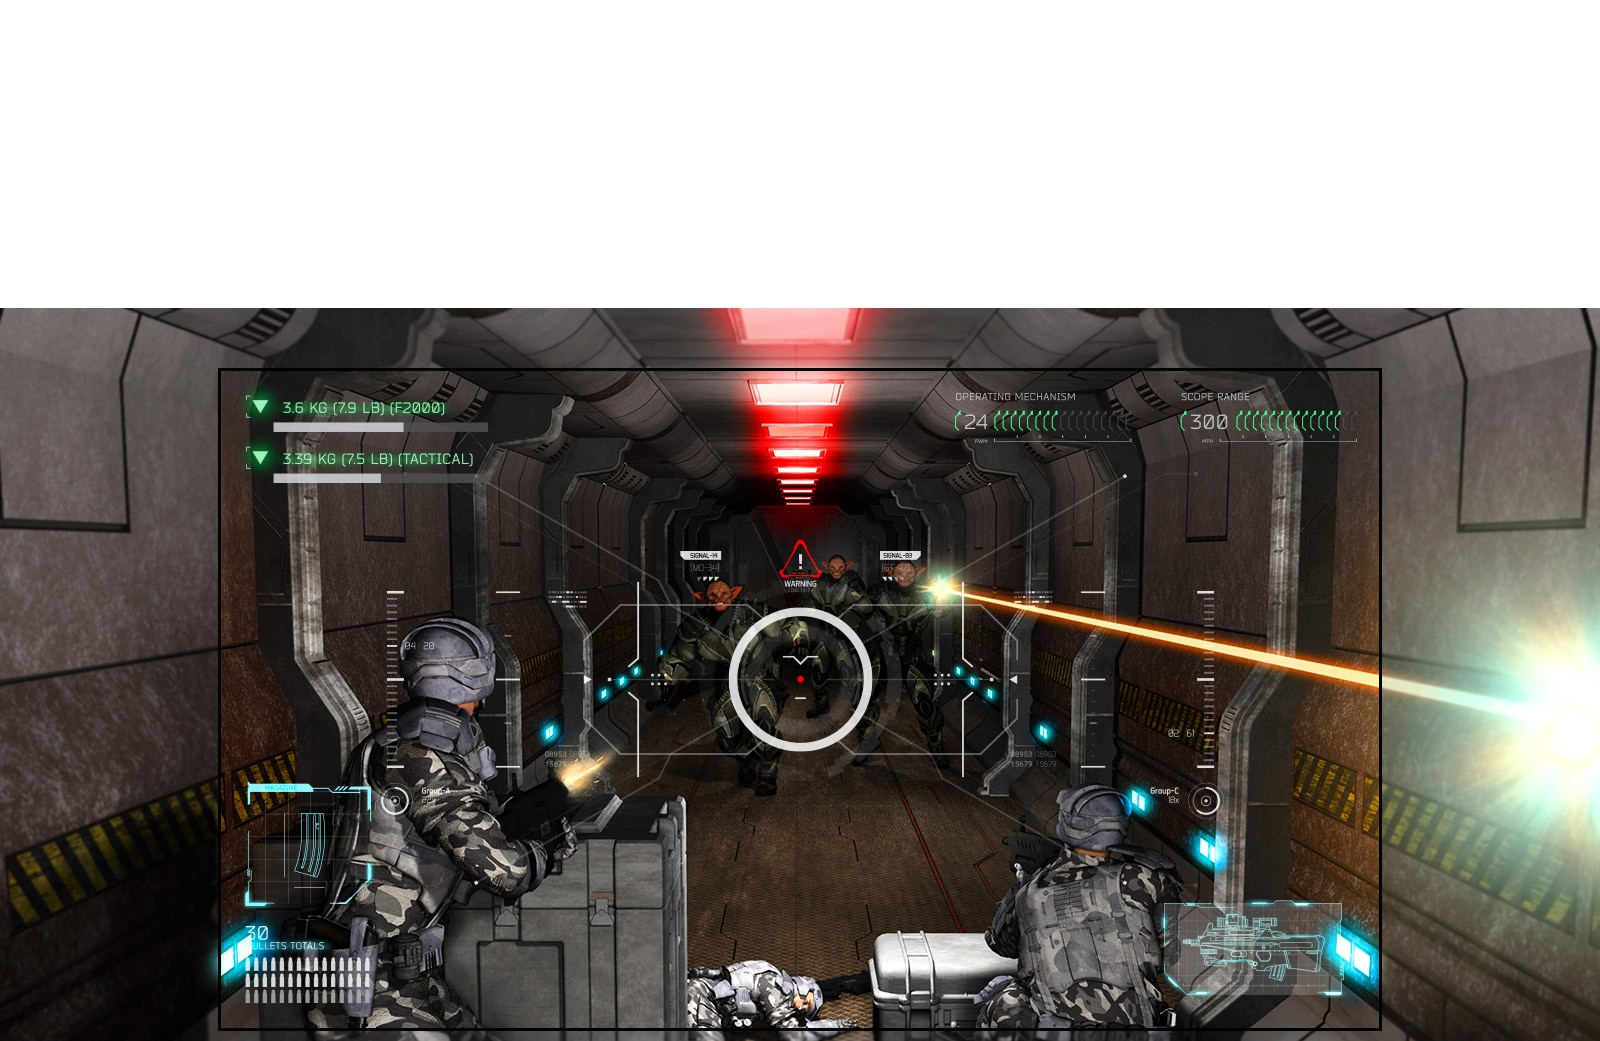 TV showing a scene from a shooting game where the player is overpowered by aliens with guns.